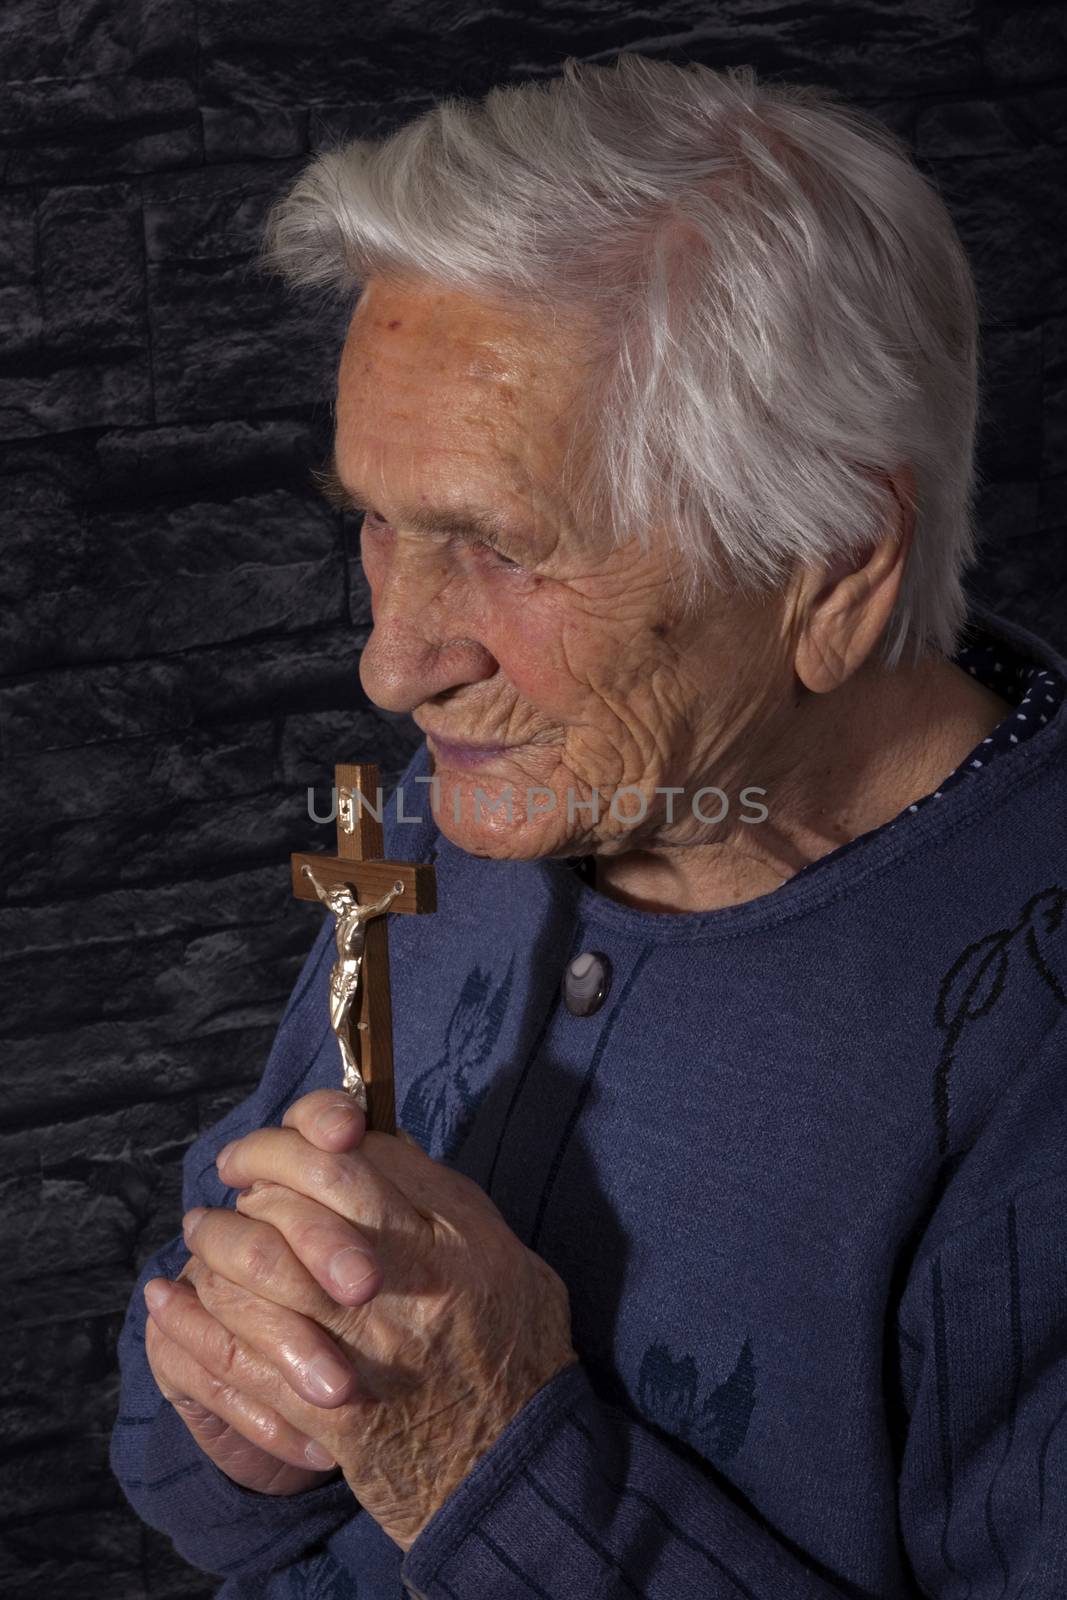 Grandmother praying. Old wrinkled beautiful woman praying with rosary. Faith, spiritualy and religion.